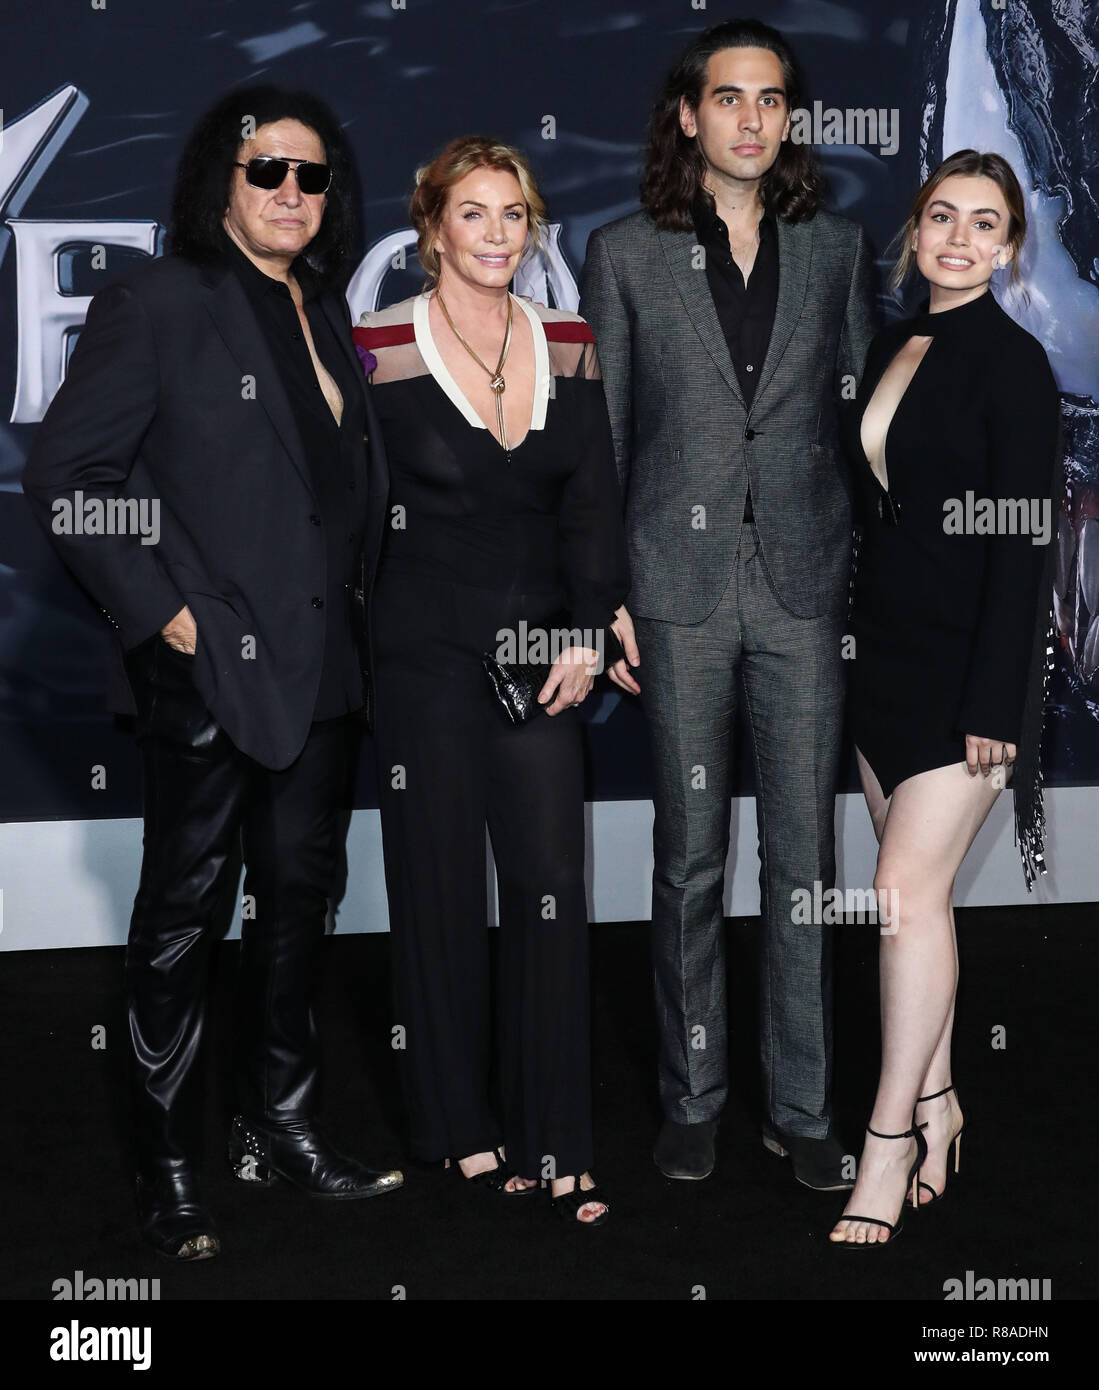 WESTWOOD, LOS ANGELES, CA, USA - OCTOBER 01: Gene Simmons, Shannon Tweed Simmons, Nick Simmons, Sophie Simmons at the World Premiere Of Columbia Pictures' 'Venom' held at the Regency Village Theater on October 1, 2018 in Westwood, Los Angeles, California, United States. (Photo by Xavier Collin/Image Press Agency) Stock Photo